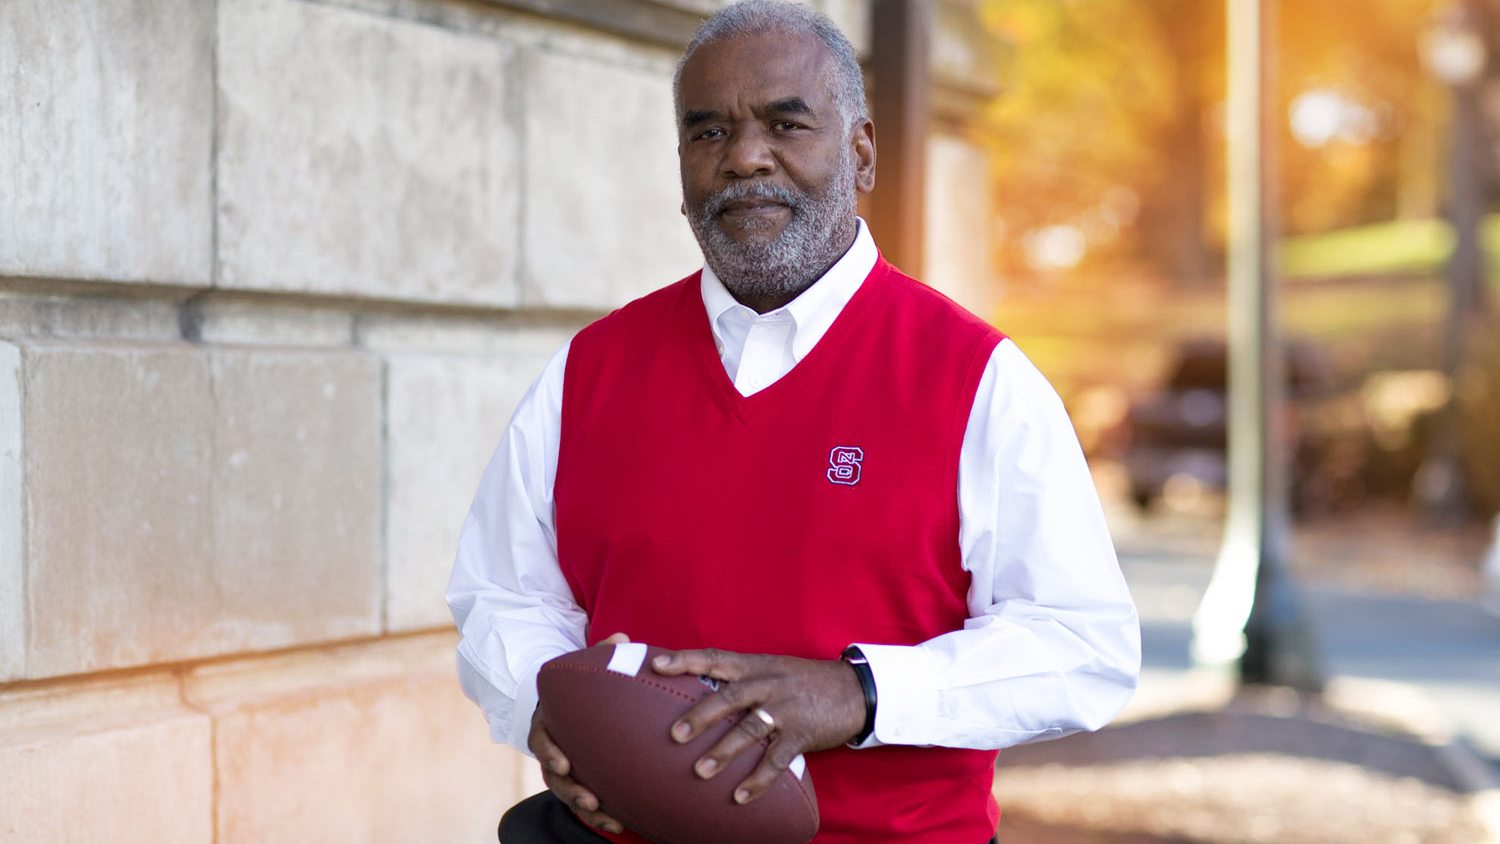 Marcus Martin Holding a Football - Marucs Martin Named Distinguished Alumnus of the Year - College of Natural Resources News NC State University